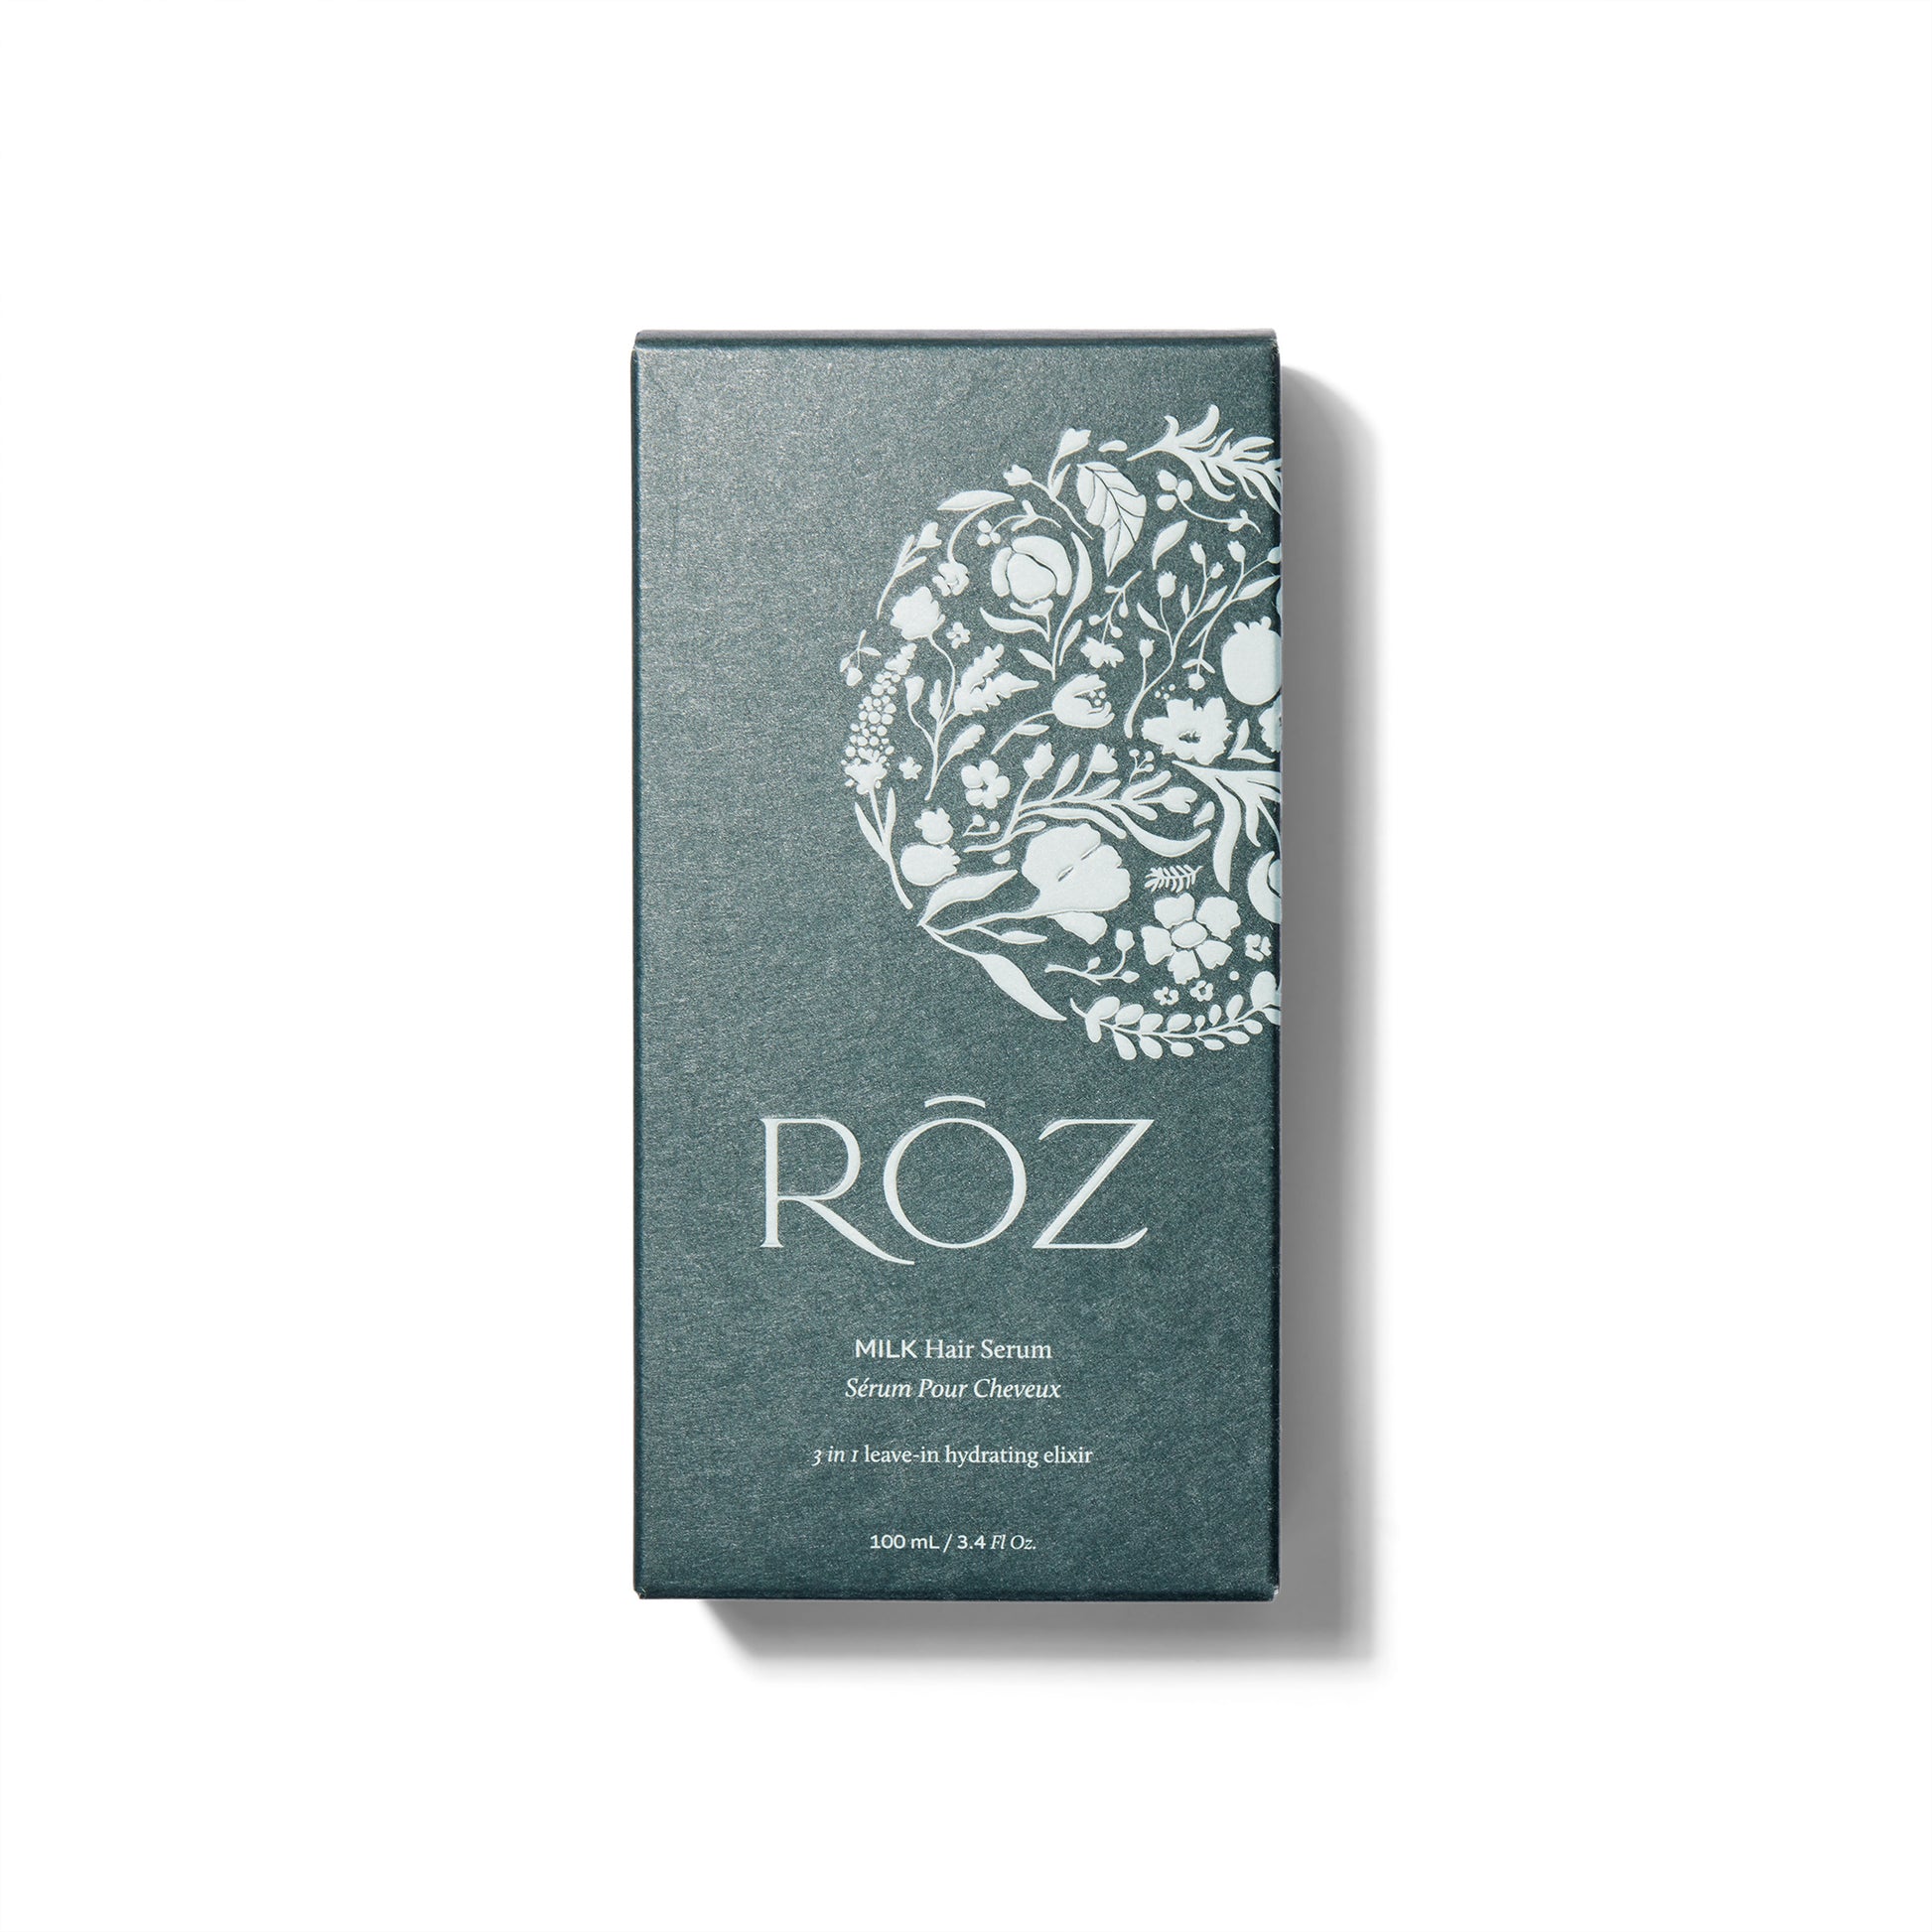 The box for the ROZ Milk Serum. The box is a deep green with a raised illustration of flowers in a circle. 